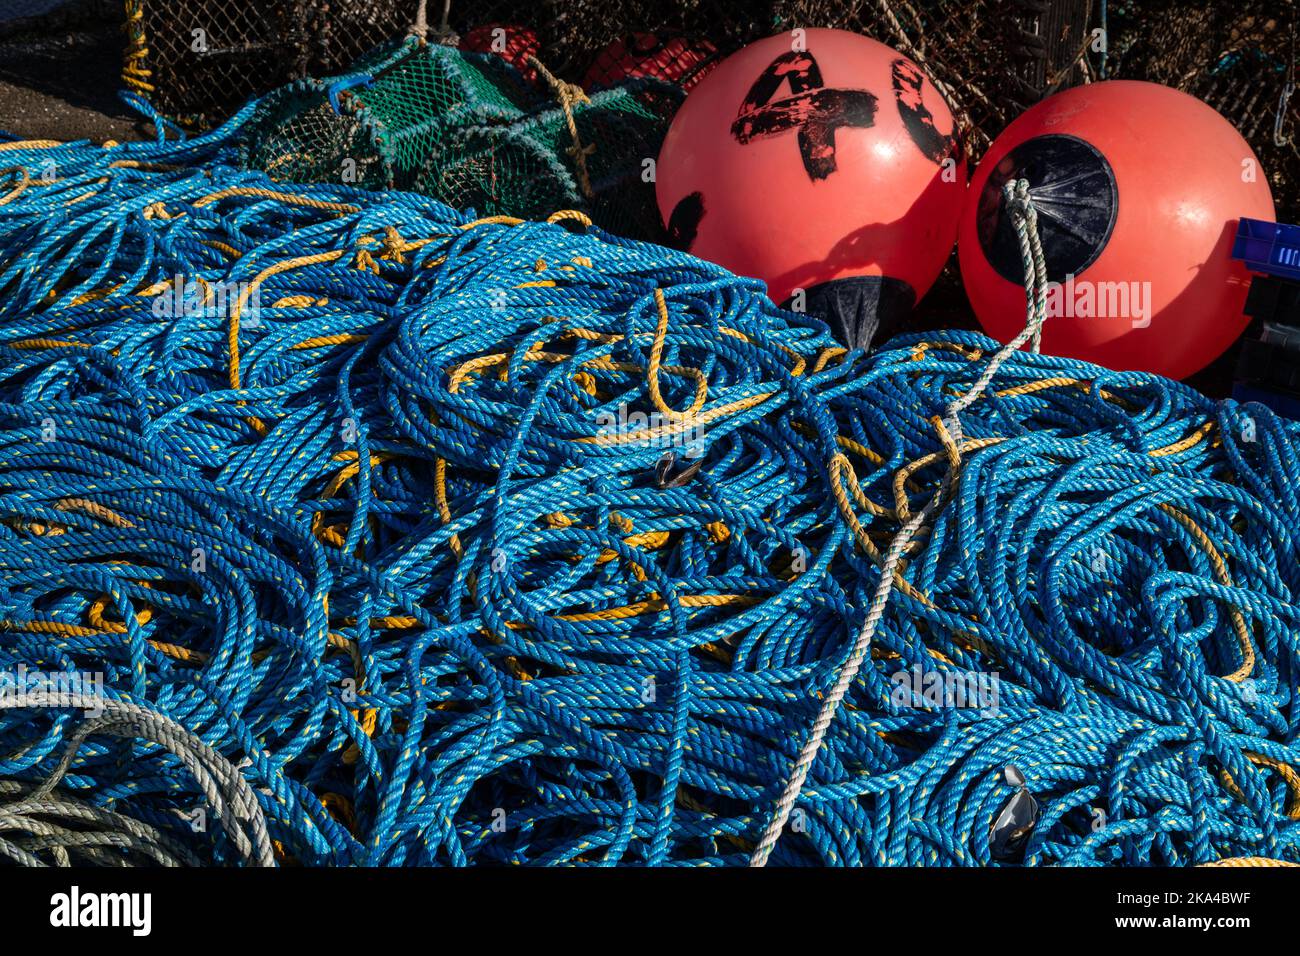 Large plastic boxes filled with fishing nets, floats etc on the